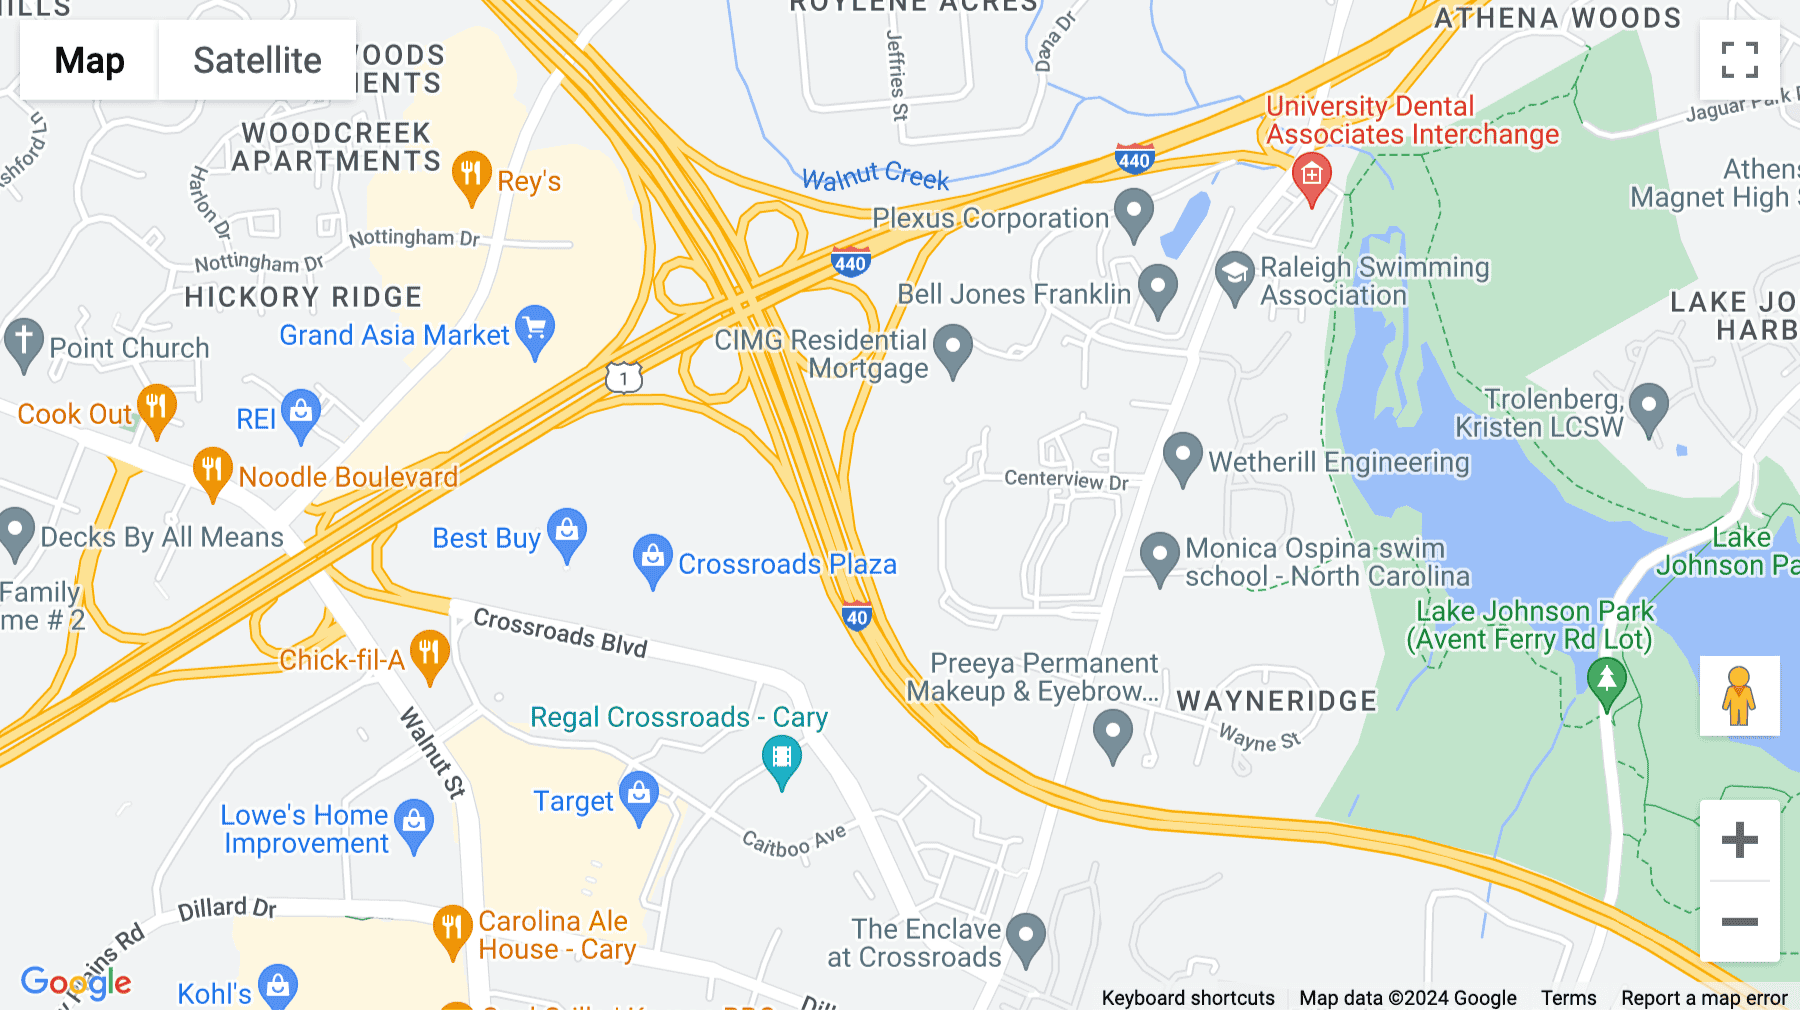 Click for interative map of 5540 Centerview Drive, Suite 200, Raleigh